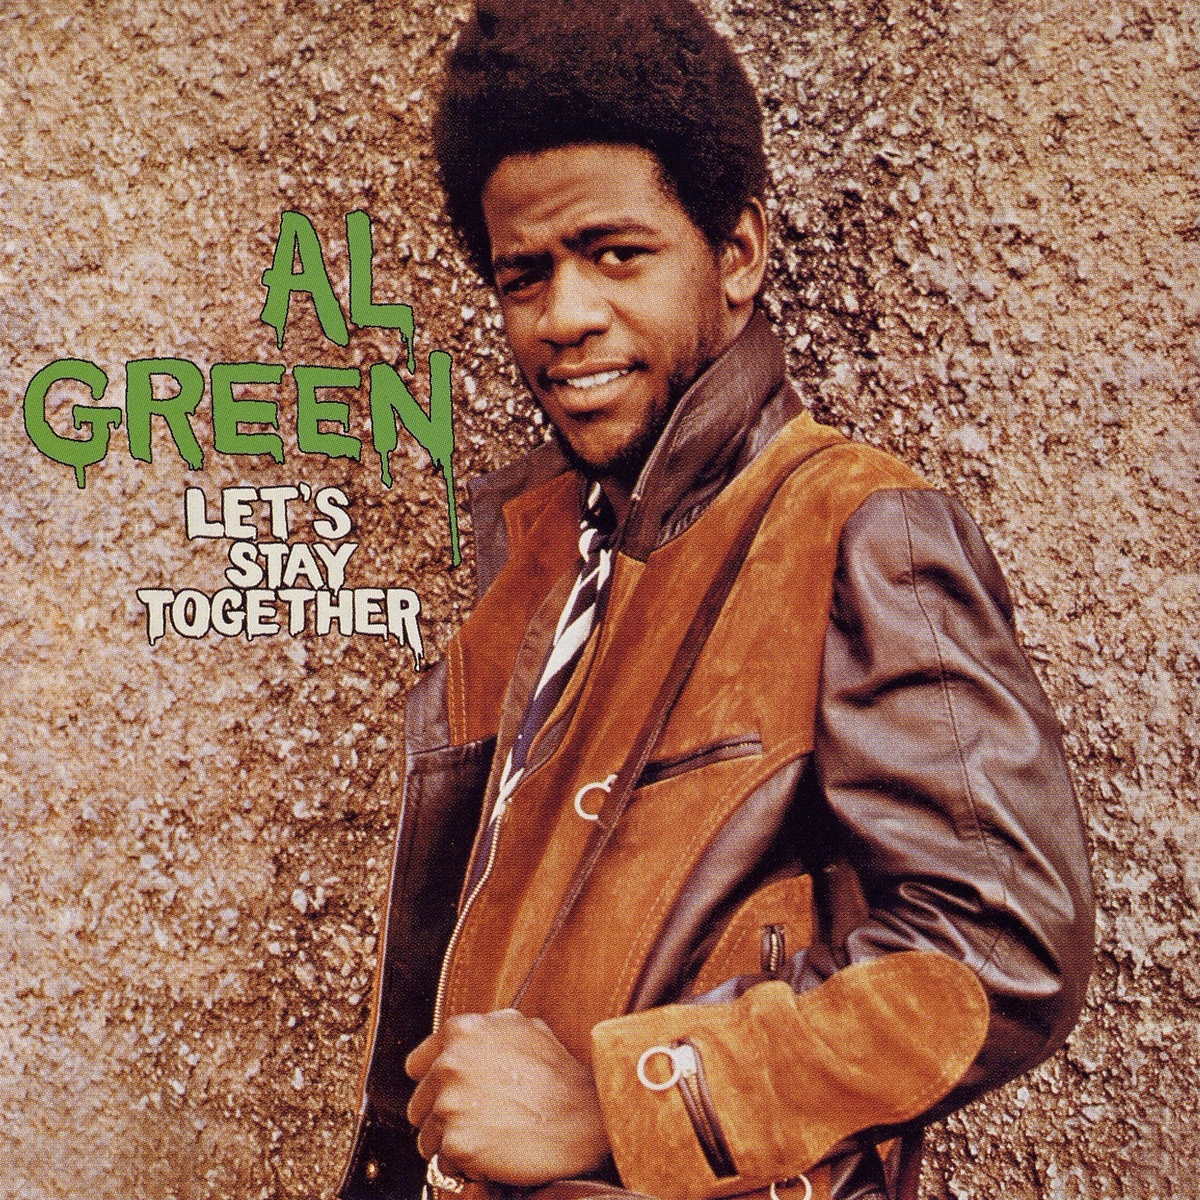 Let's Stay Together ( song ) ... Al Green